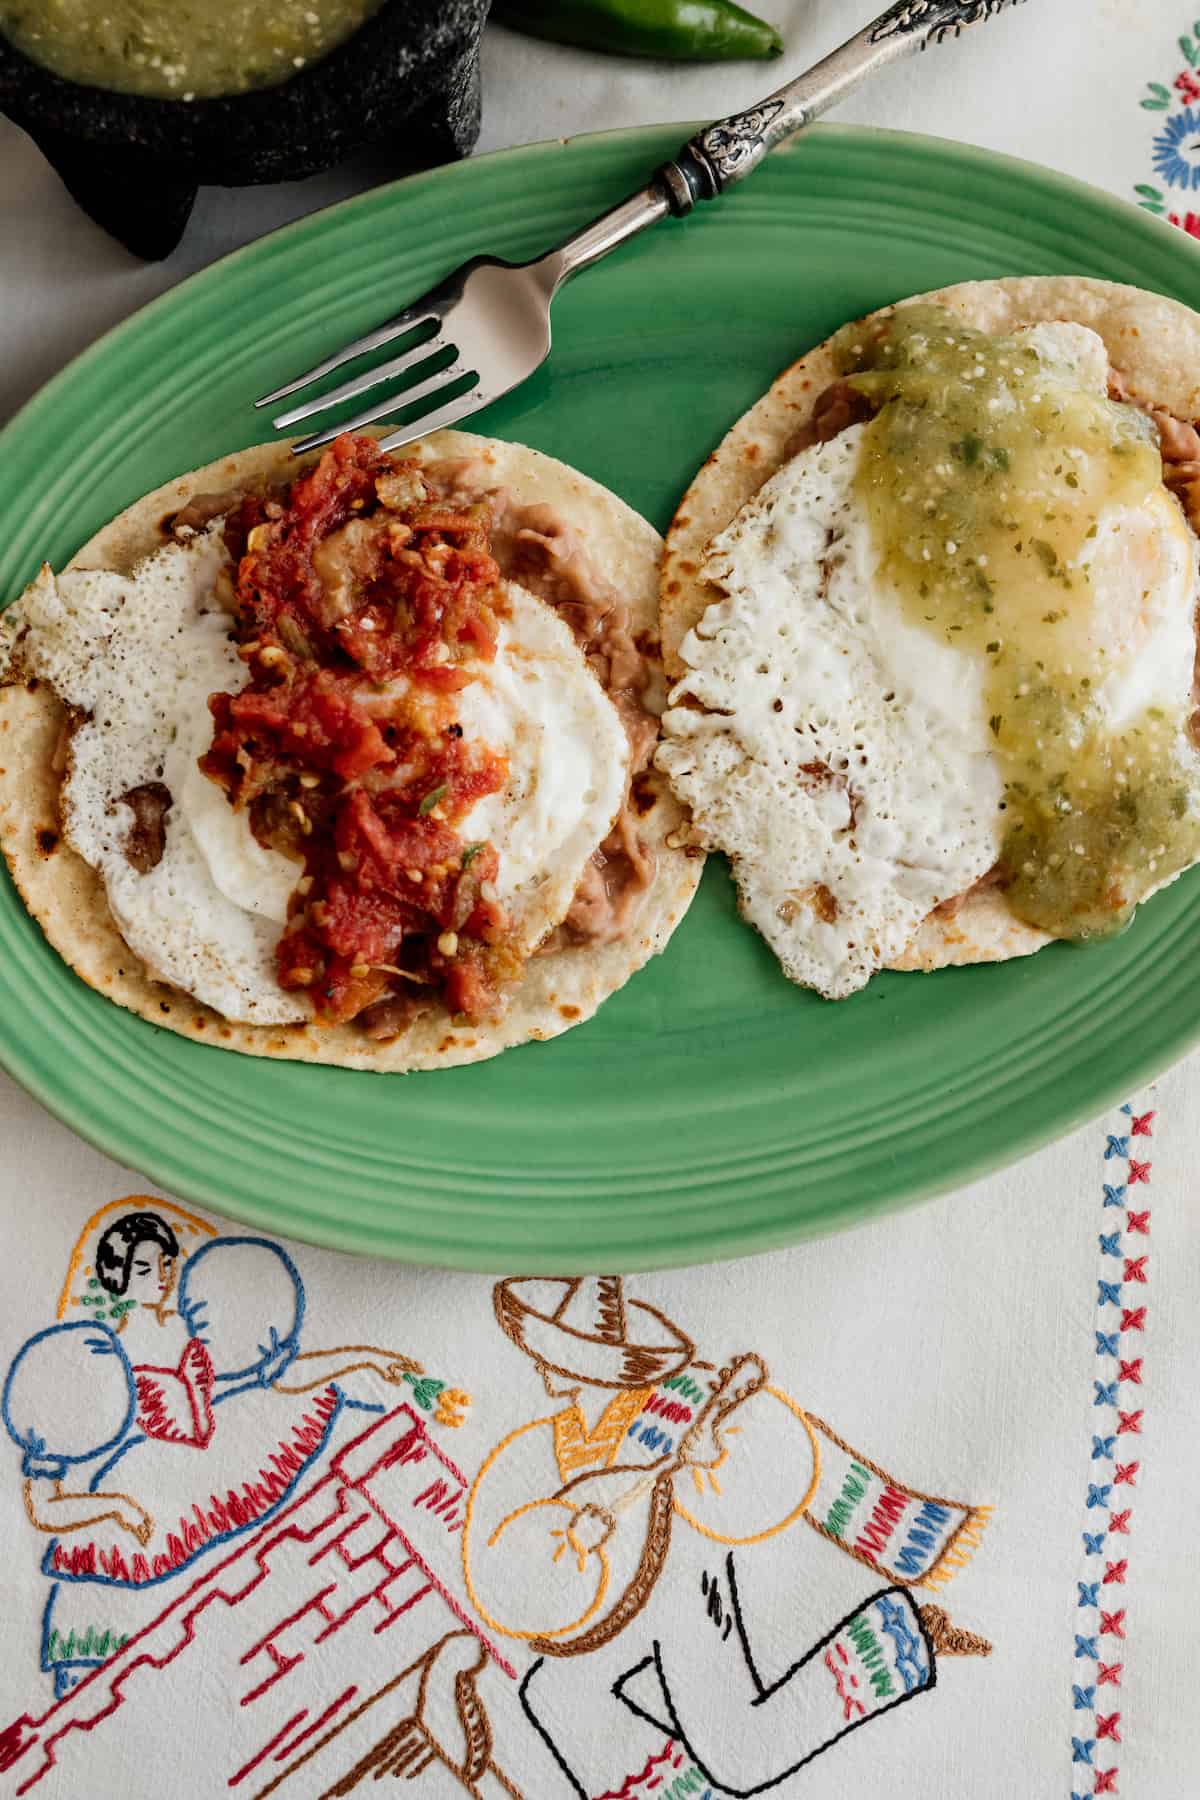 green plate with Huevos Divorciados -- corn tortillas topped with refried beans, eggs, and red and green salsa